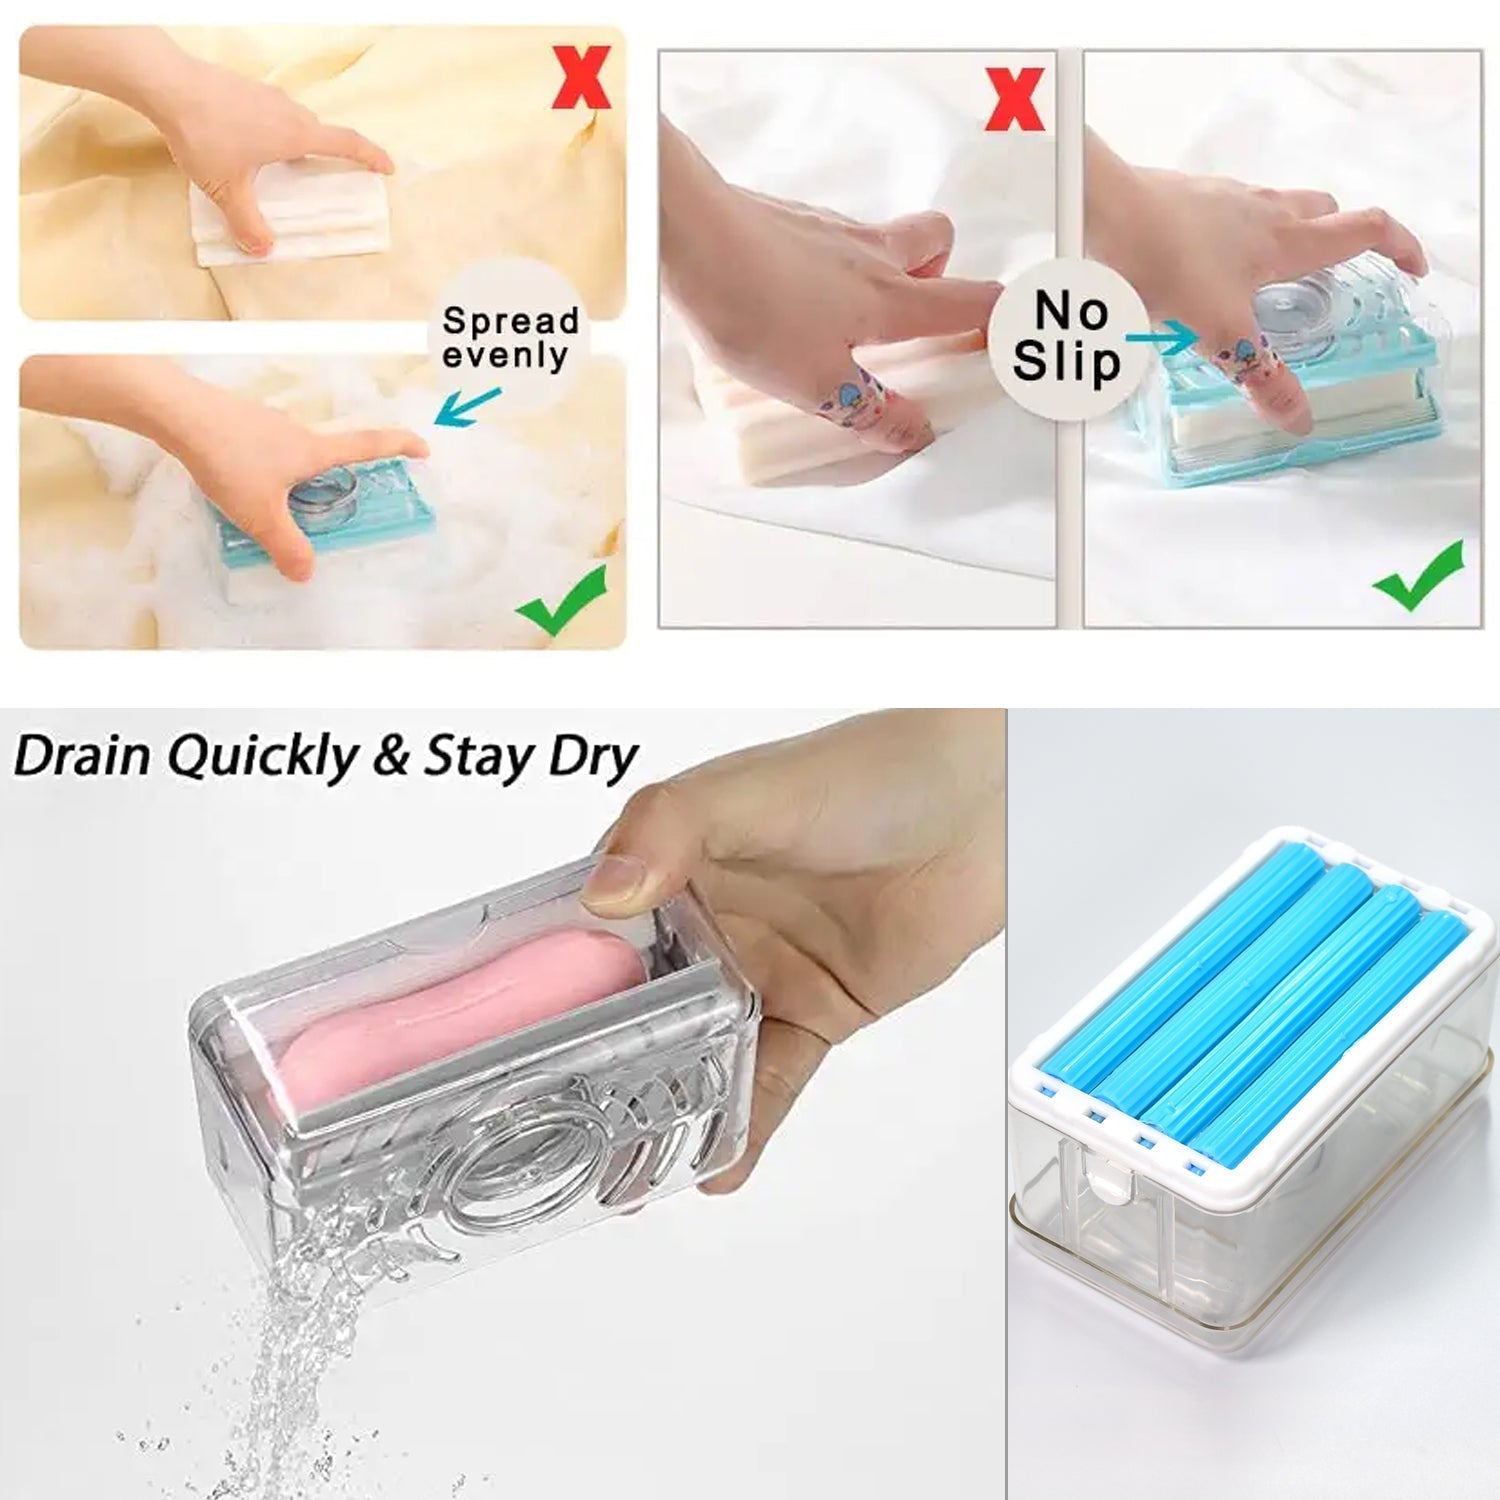 6296B 2-in-1 Portable Soap Roller Dish & Soap Dispenser with Roller and Drain Holes, Multifunctional Soap Holder Foaming Soap Bar Box for Home, Kitchen, Bathroom DeoDap